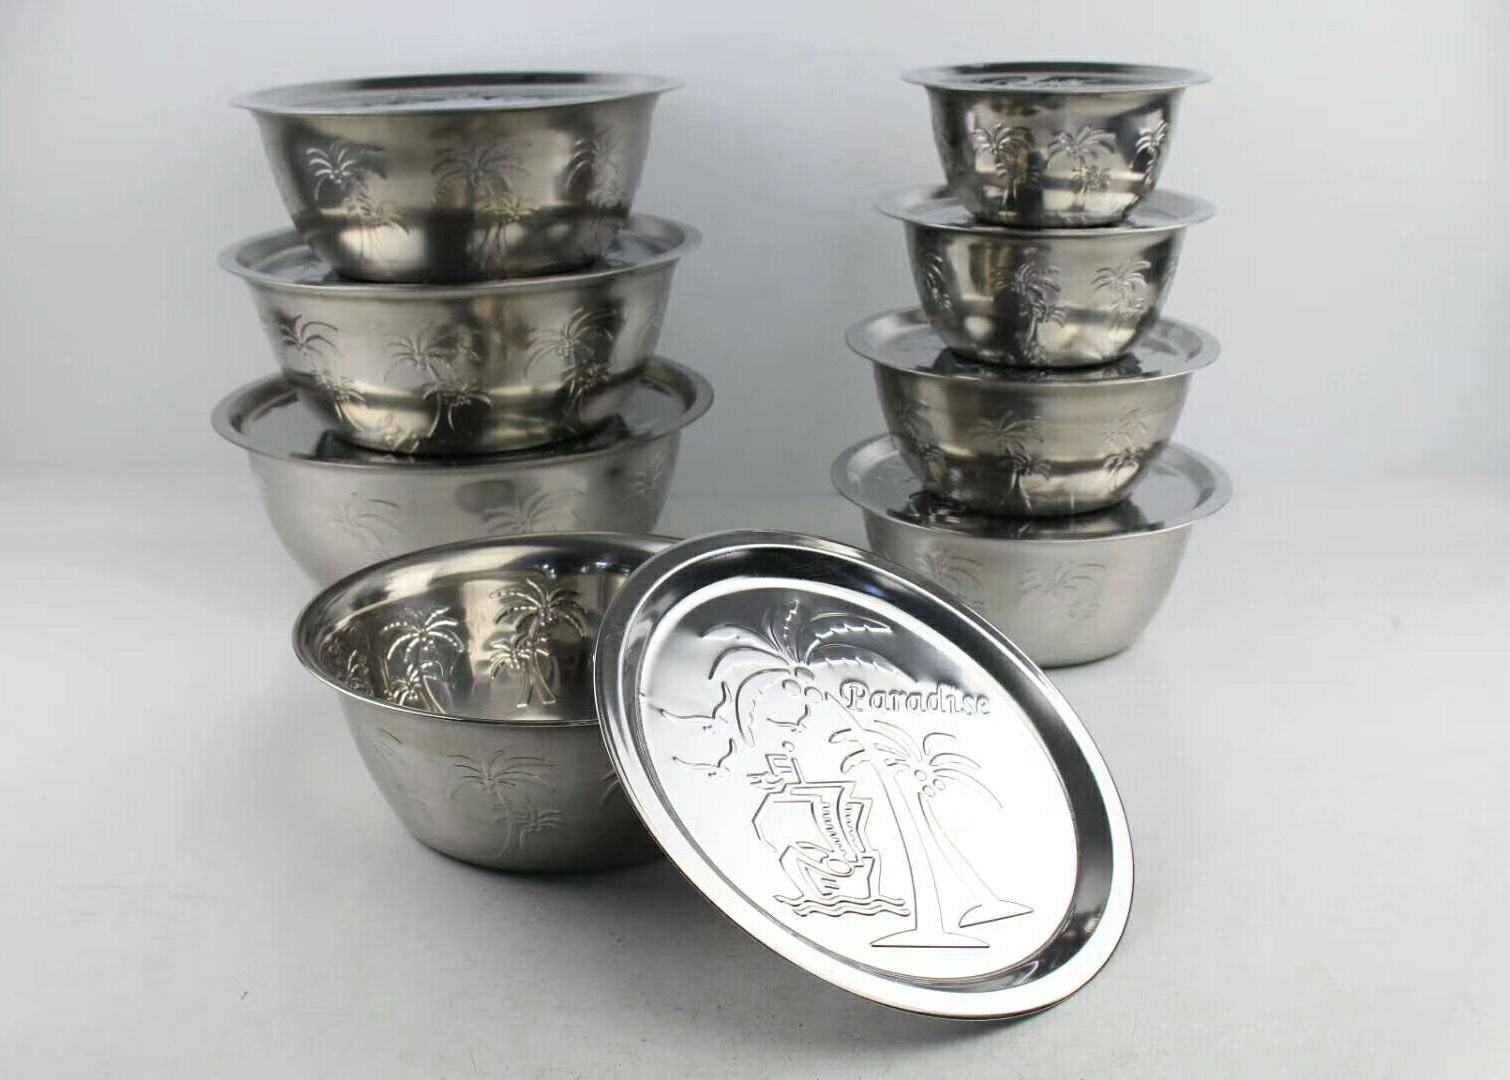 China Supplier Single Cup Coffee Maker -
 Stainless Steel Kitchenware Decorative Belly Shape Finger Bowl Gp003 – Long Prosper